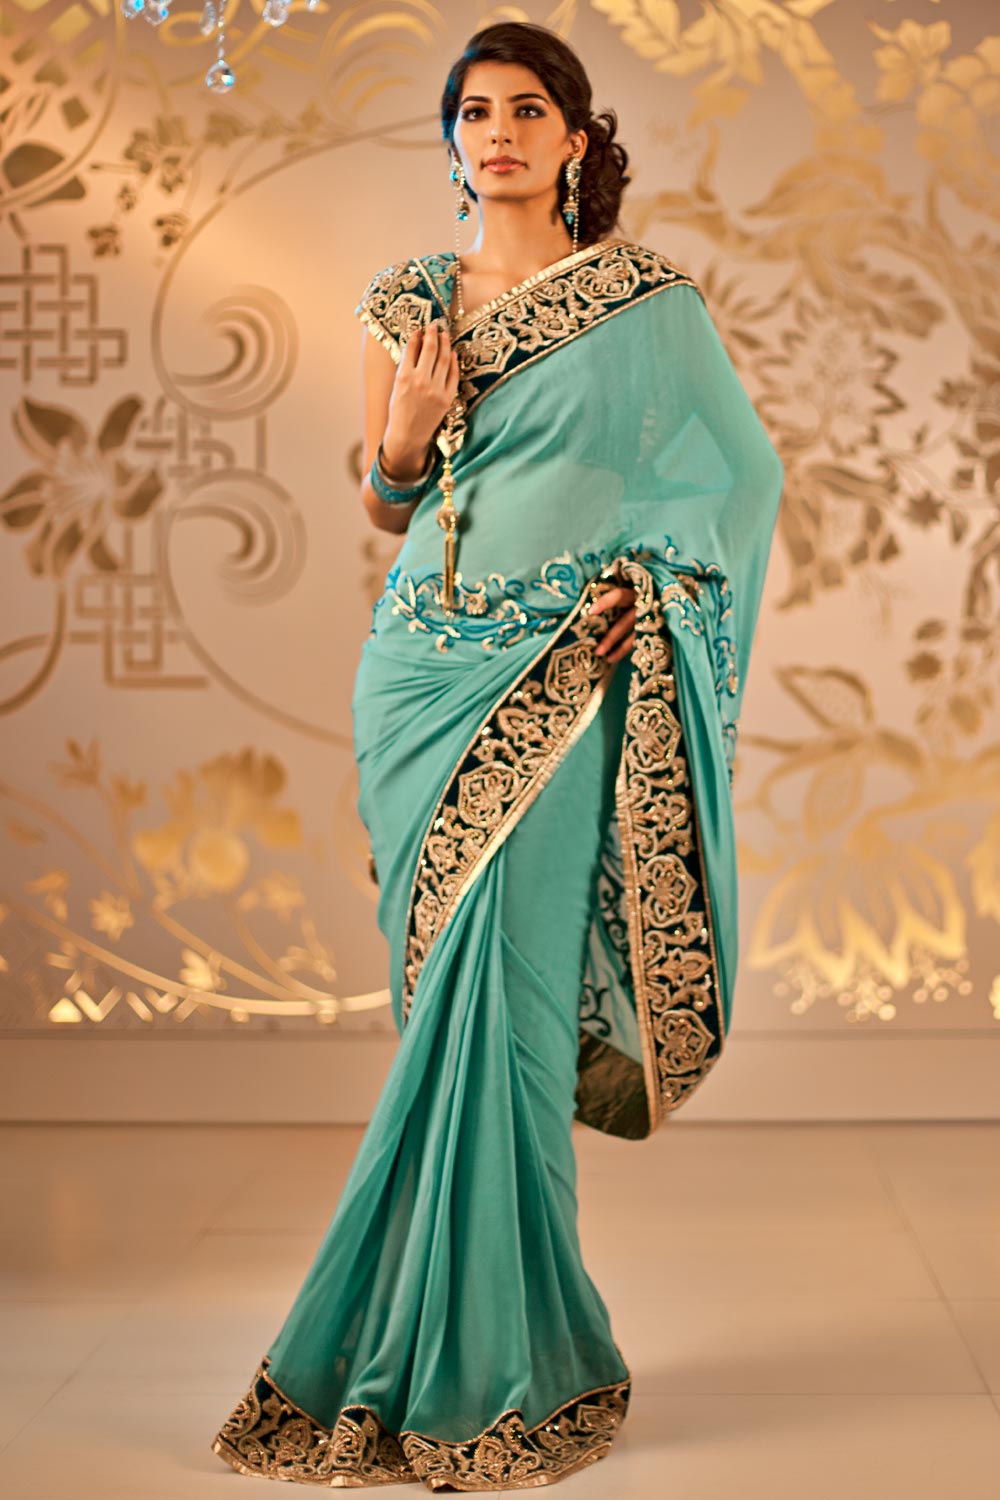 Bridal Sarees | Indian Bridal Sarees | Bridal Sarees for ...